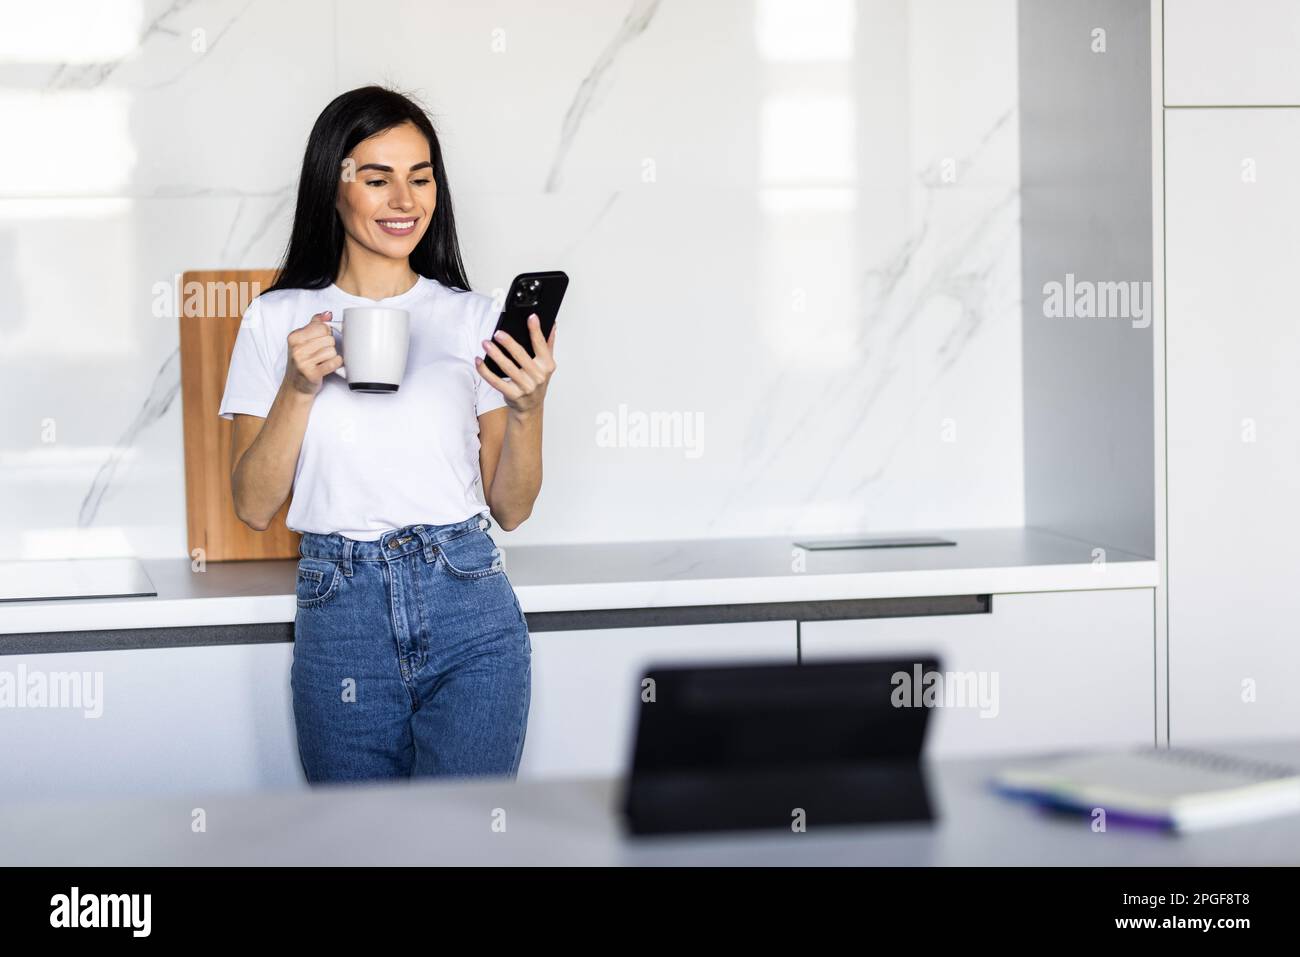 Young woman using smartphone leaning at kitchen table with coffee mug and organizer in a modern home. Smiling woman reading phone message. Brunette ha Stock Photo